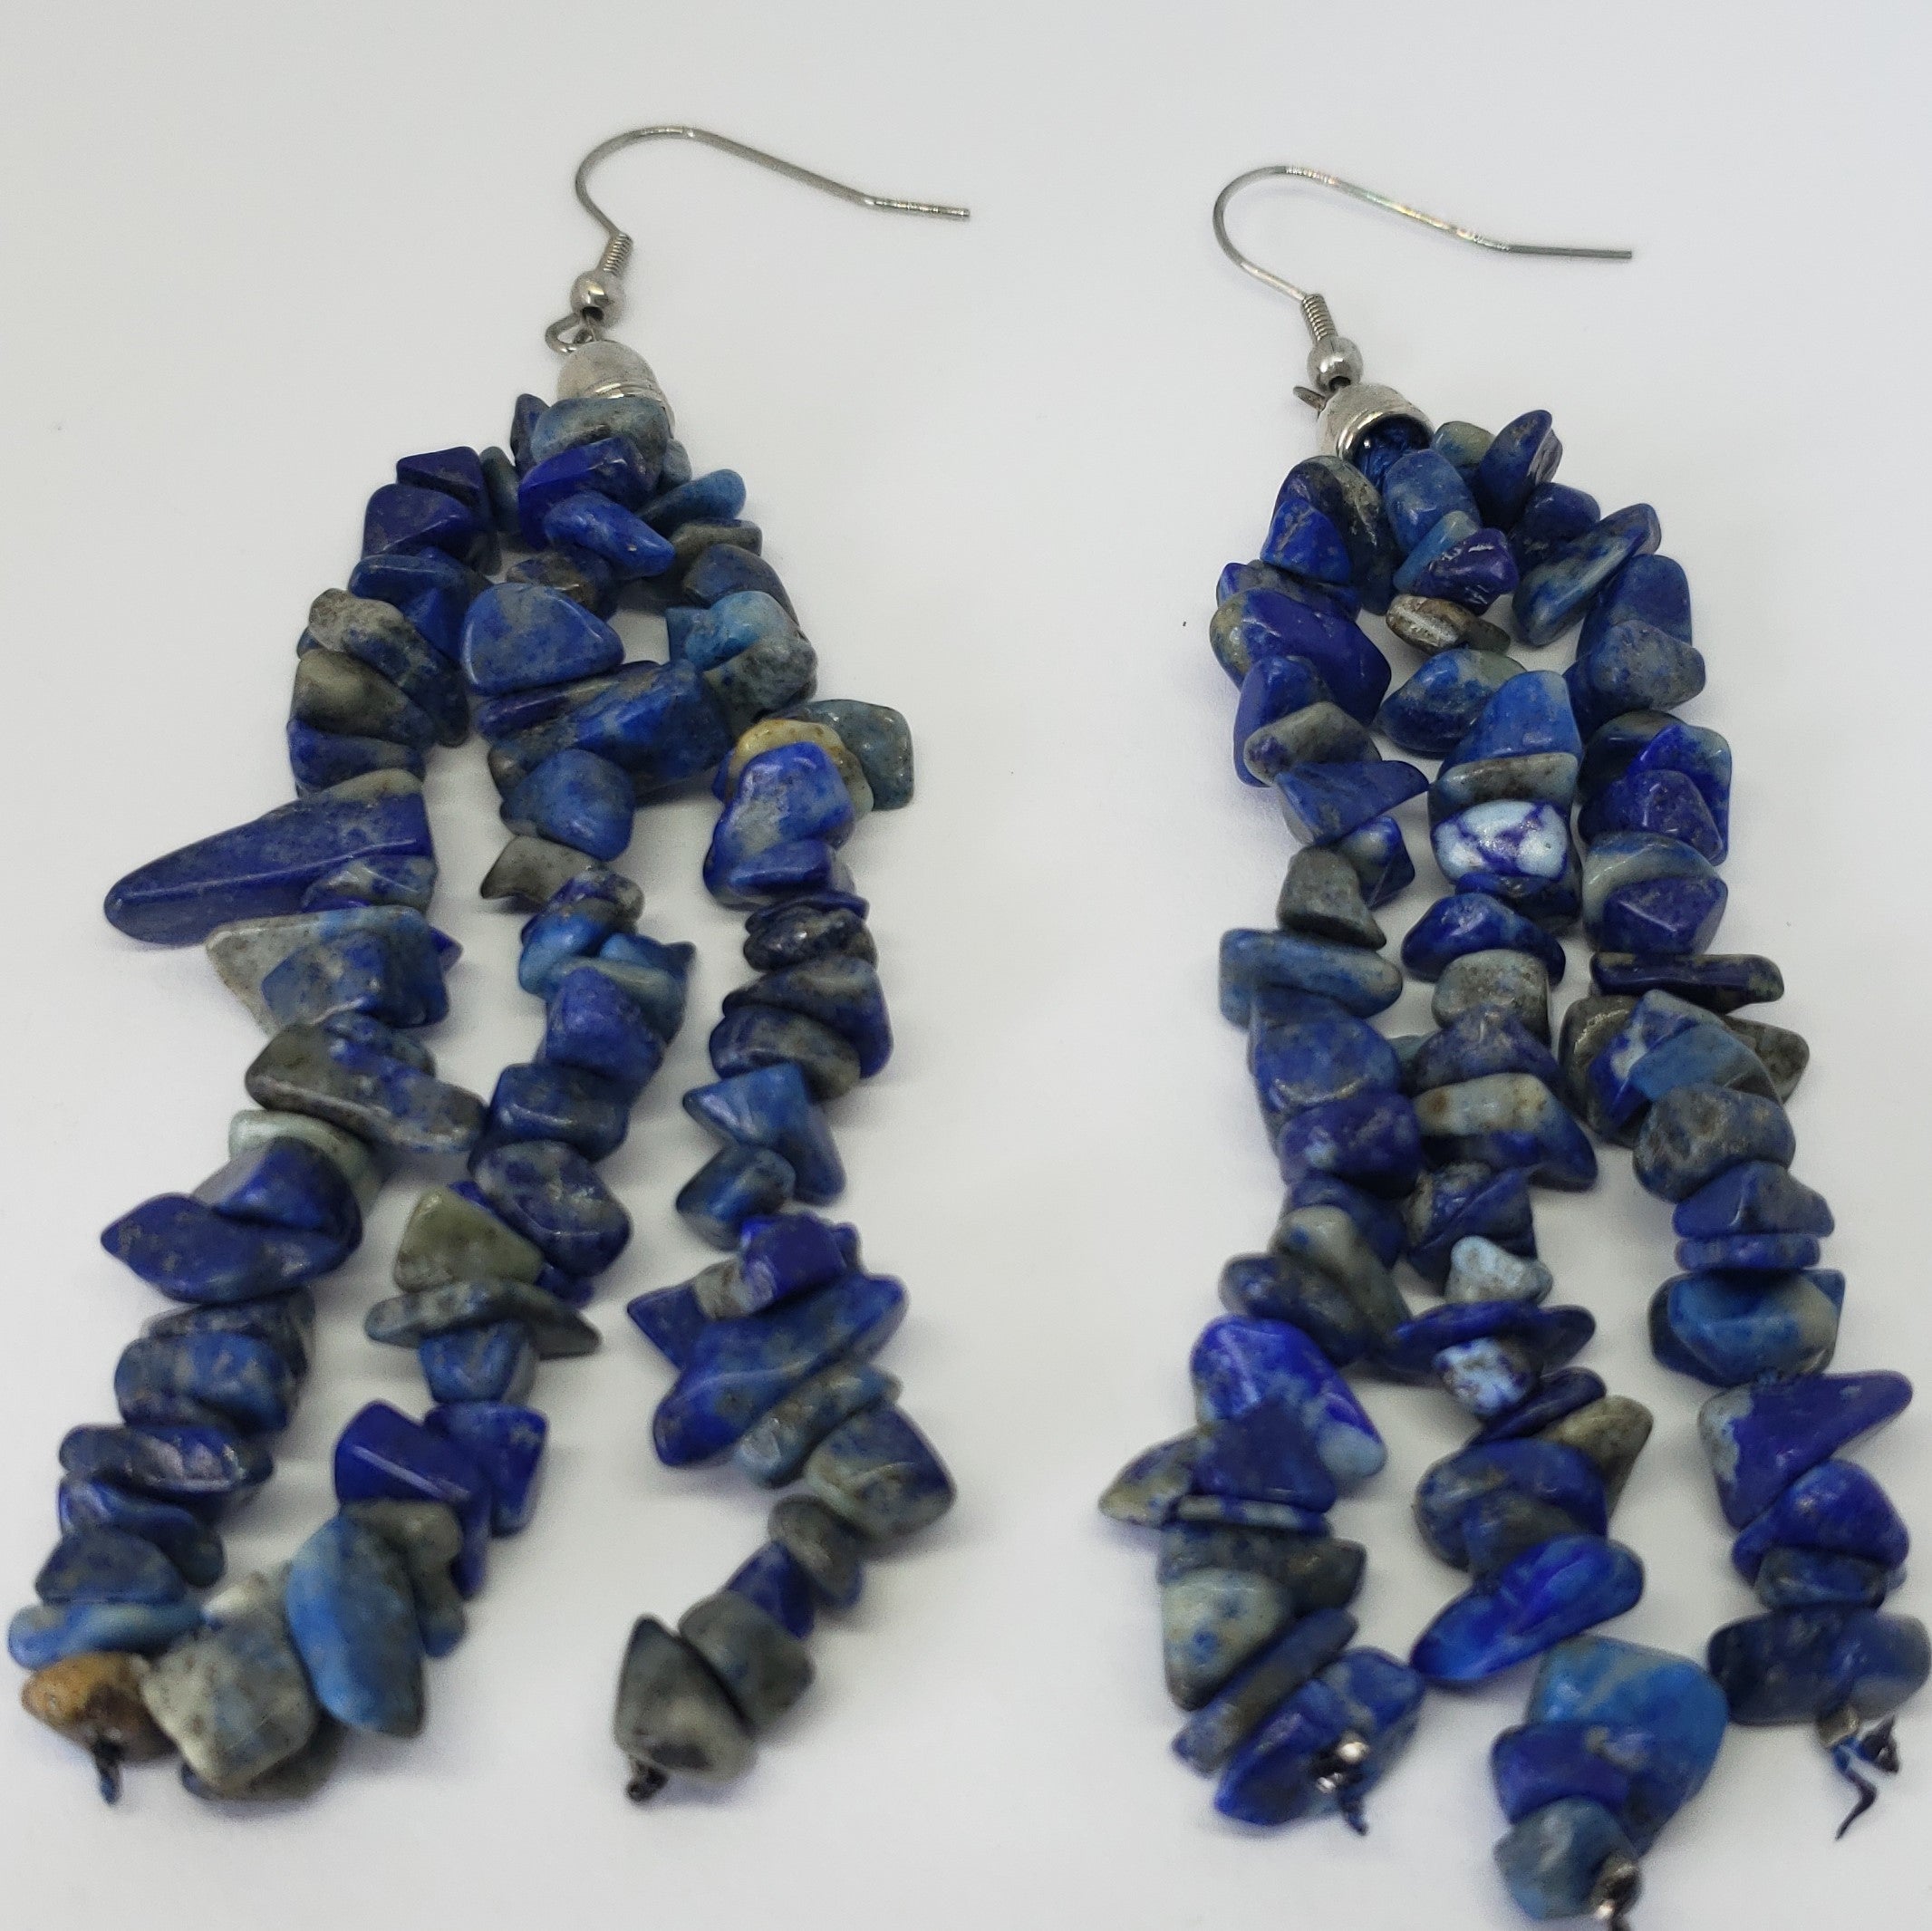 Lapis Lazuli Polished Chip Beads Triple Strand Earrings in Stainless Steel - Houzz of DVA Boutique